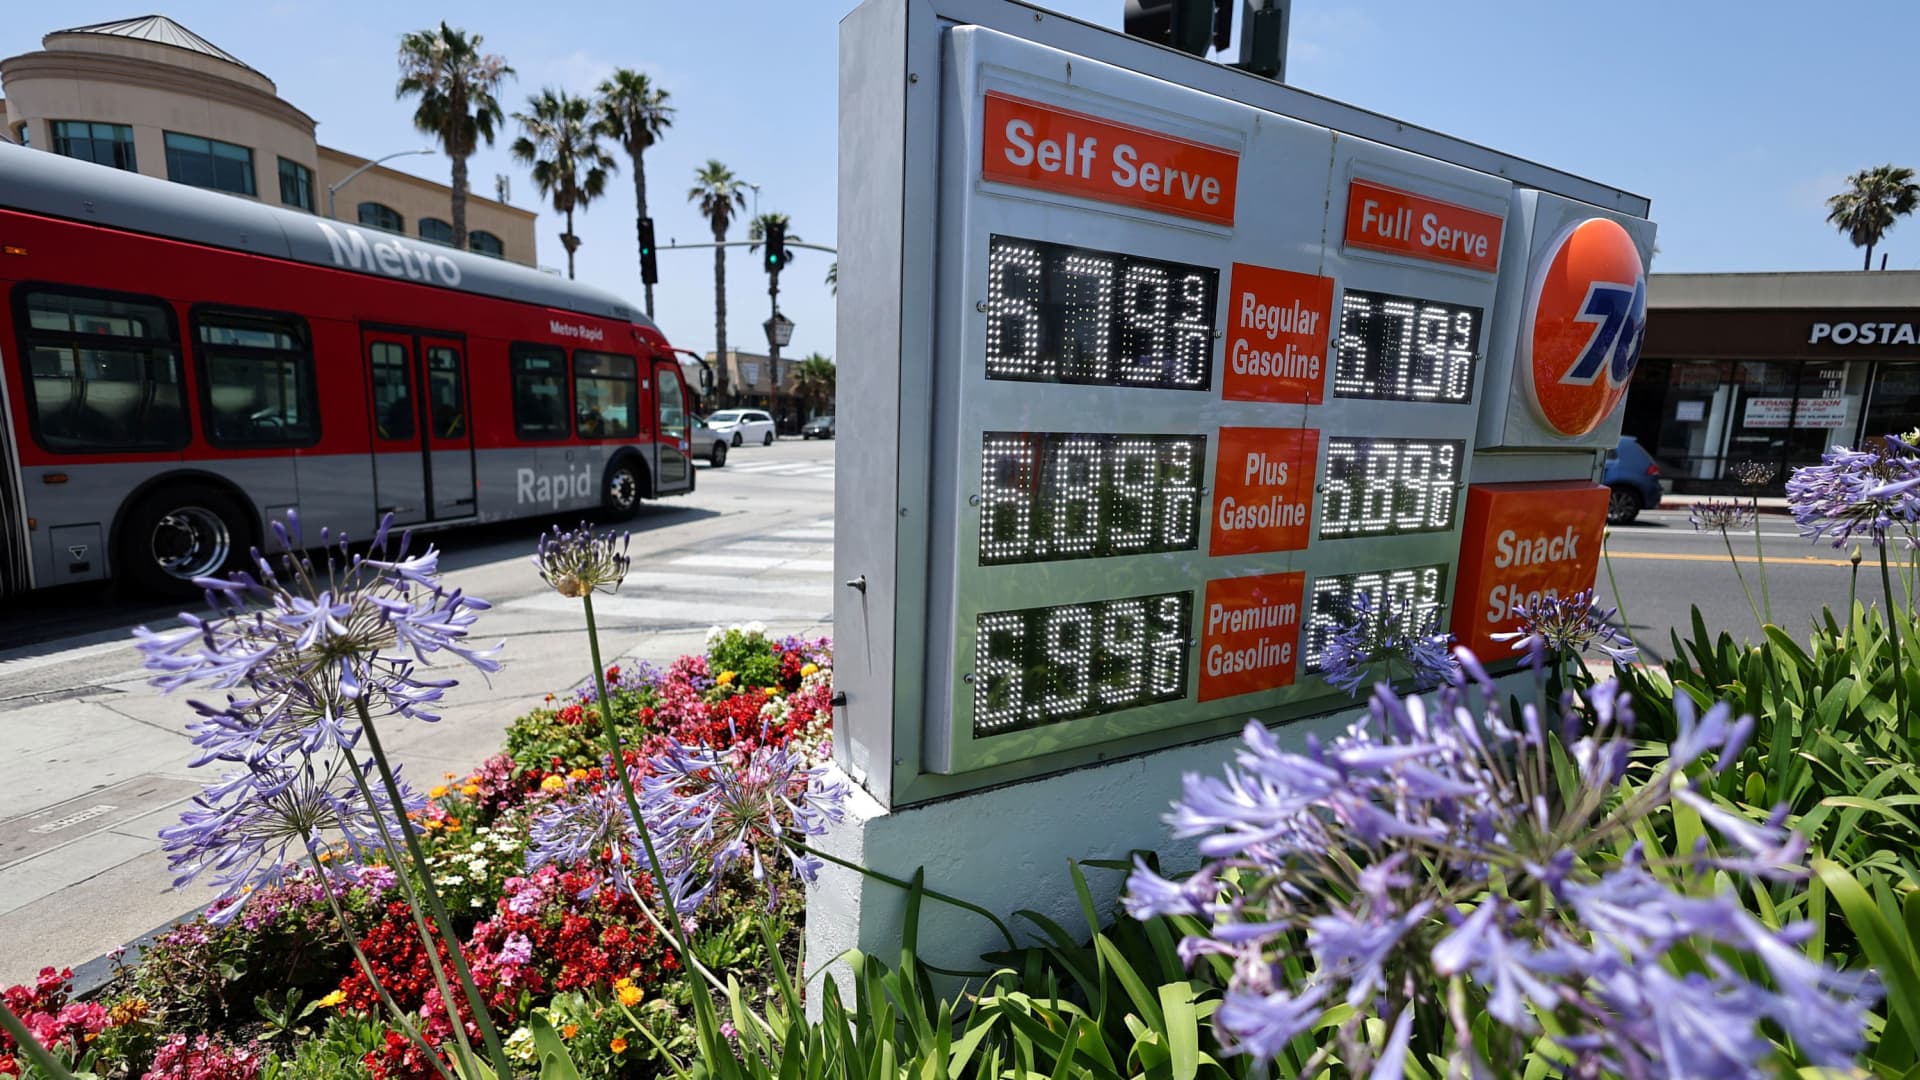 Gas prices over the $6.00 mark are advertised at a 76 Station in Santa Monica, California, May 26, 2022.